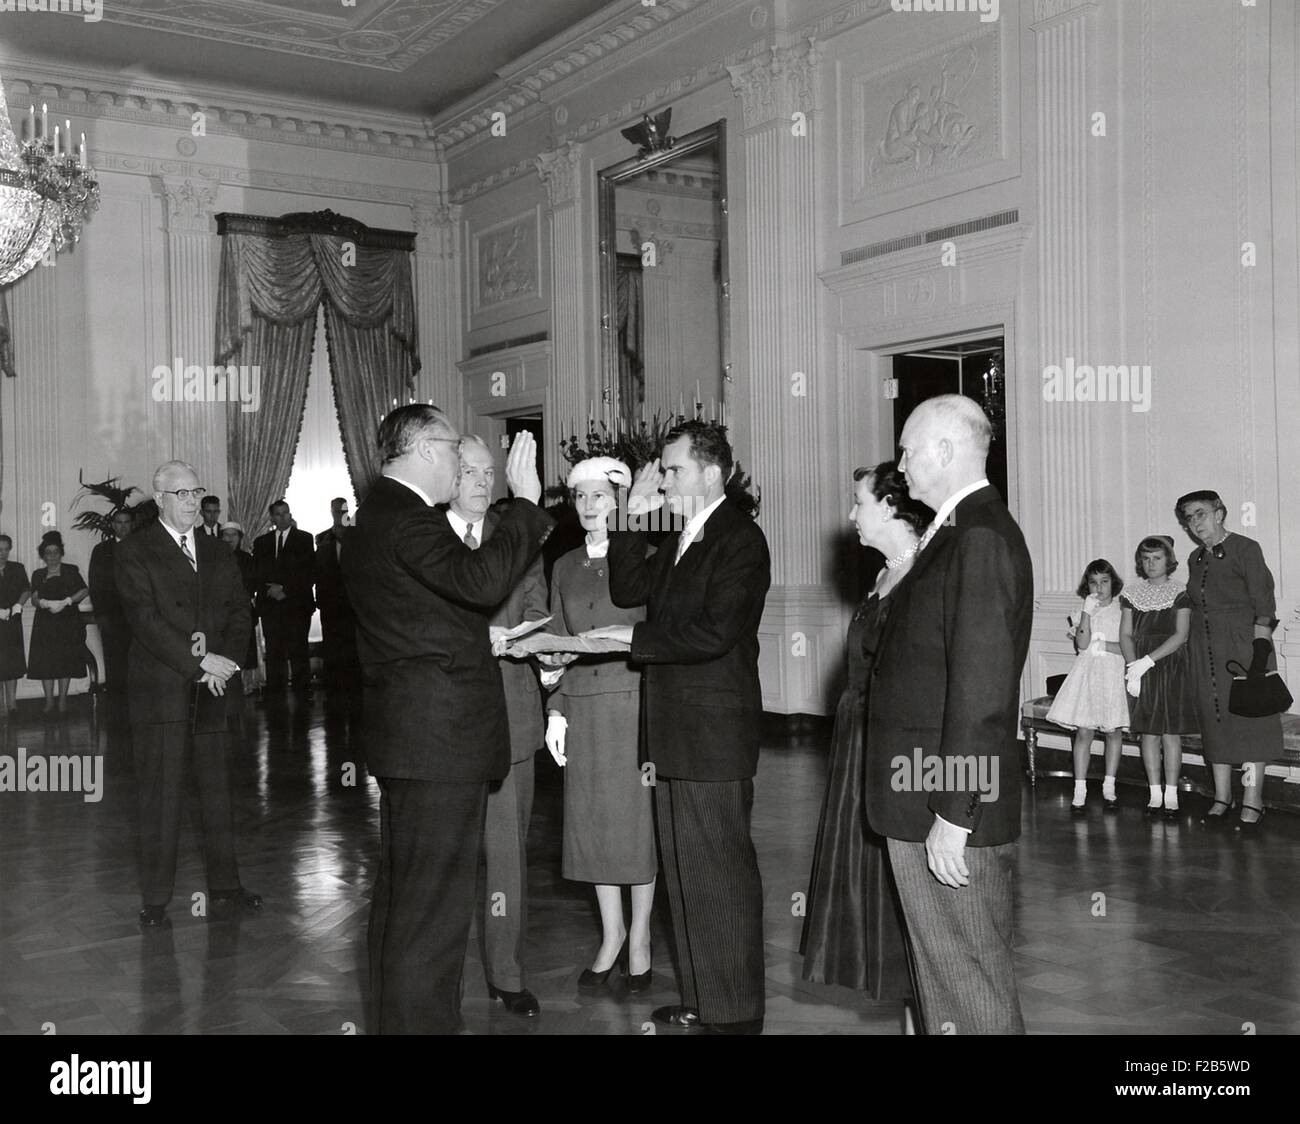 Sen. William Knowland administers the Oath of Office to Vice President-elect Richard Nixon. The private swearing in ceremony took place in the East Room of the White House on Sunday, Jan. 20, 1957. At far right is Hannah Nixon with her granddaughters, Julie and Tricia. - (BSLOC 2014 16 33) Stock Photo